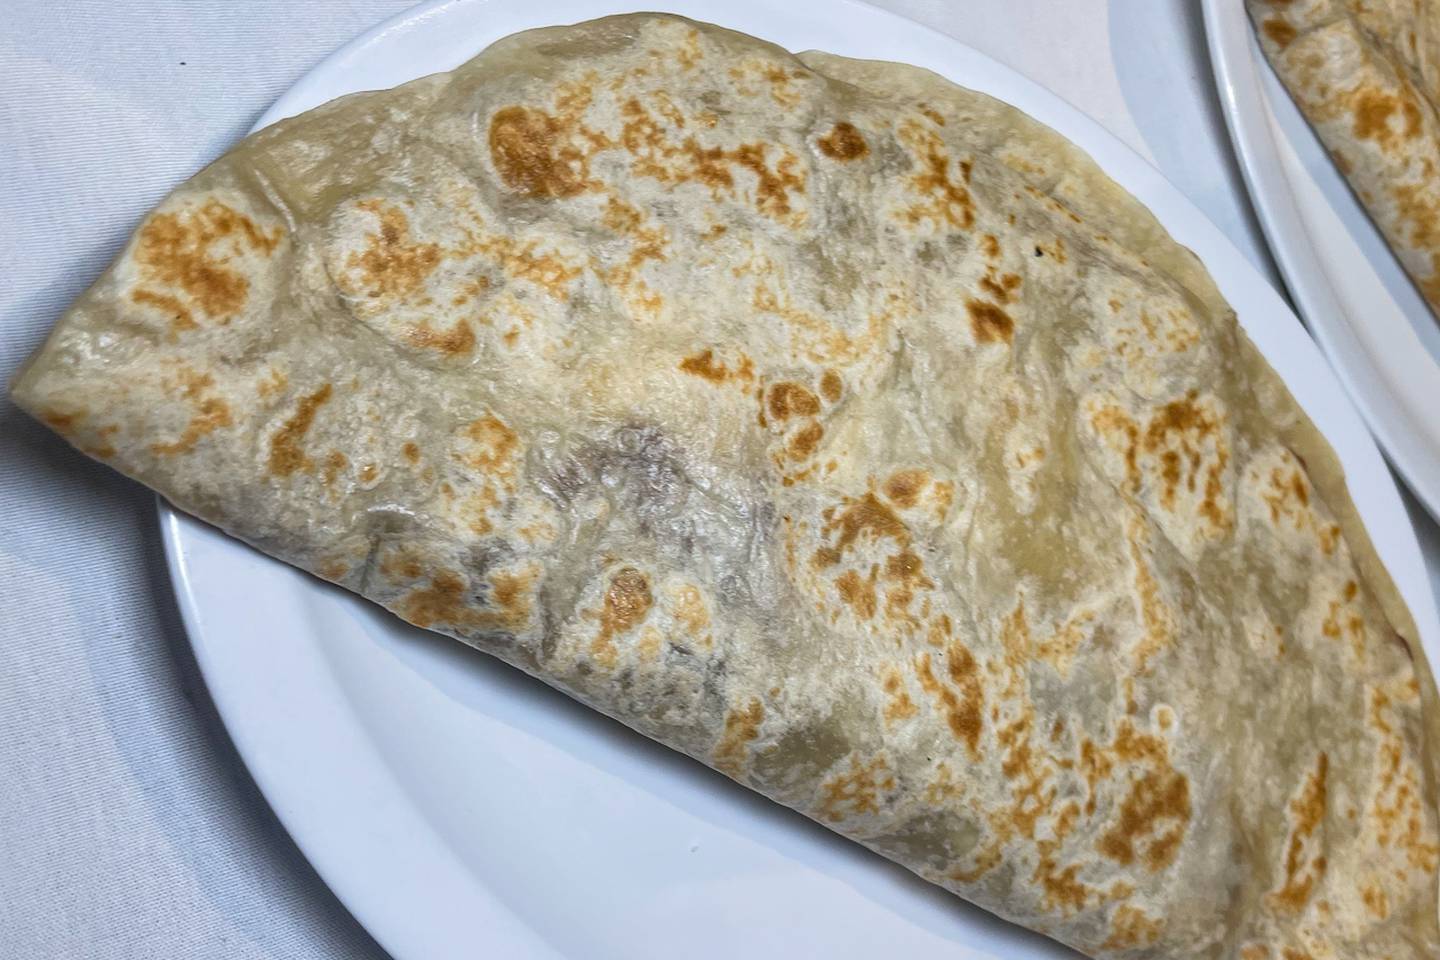 Baleadas, a traditional Honduran dish with beans, queso, crema and meat, rest on a plate